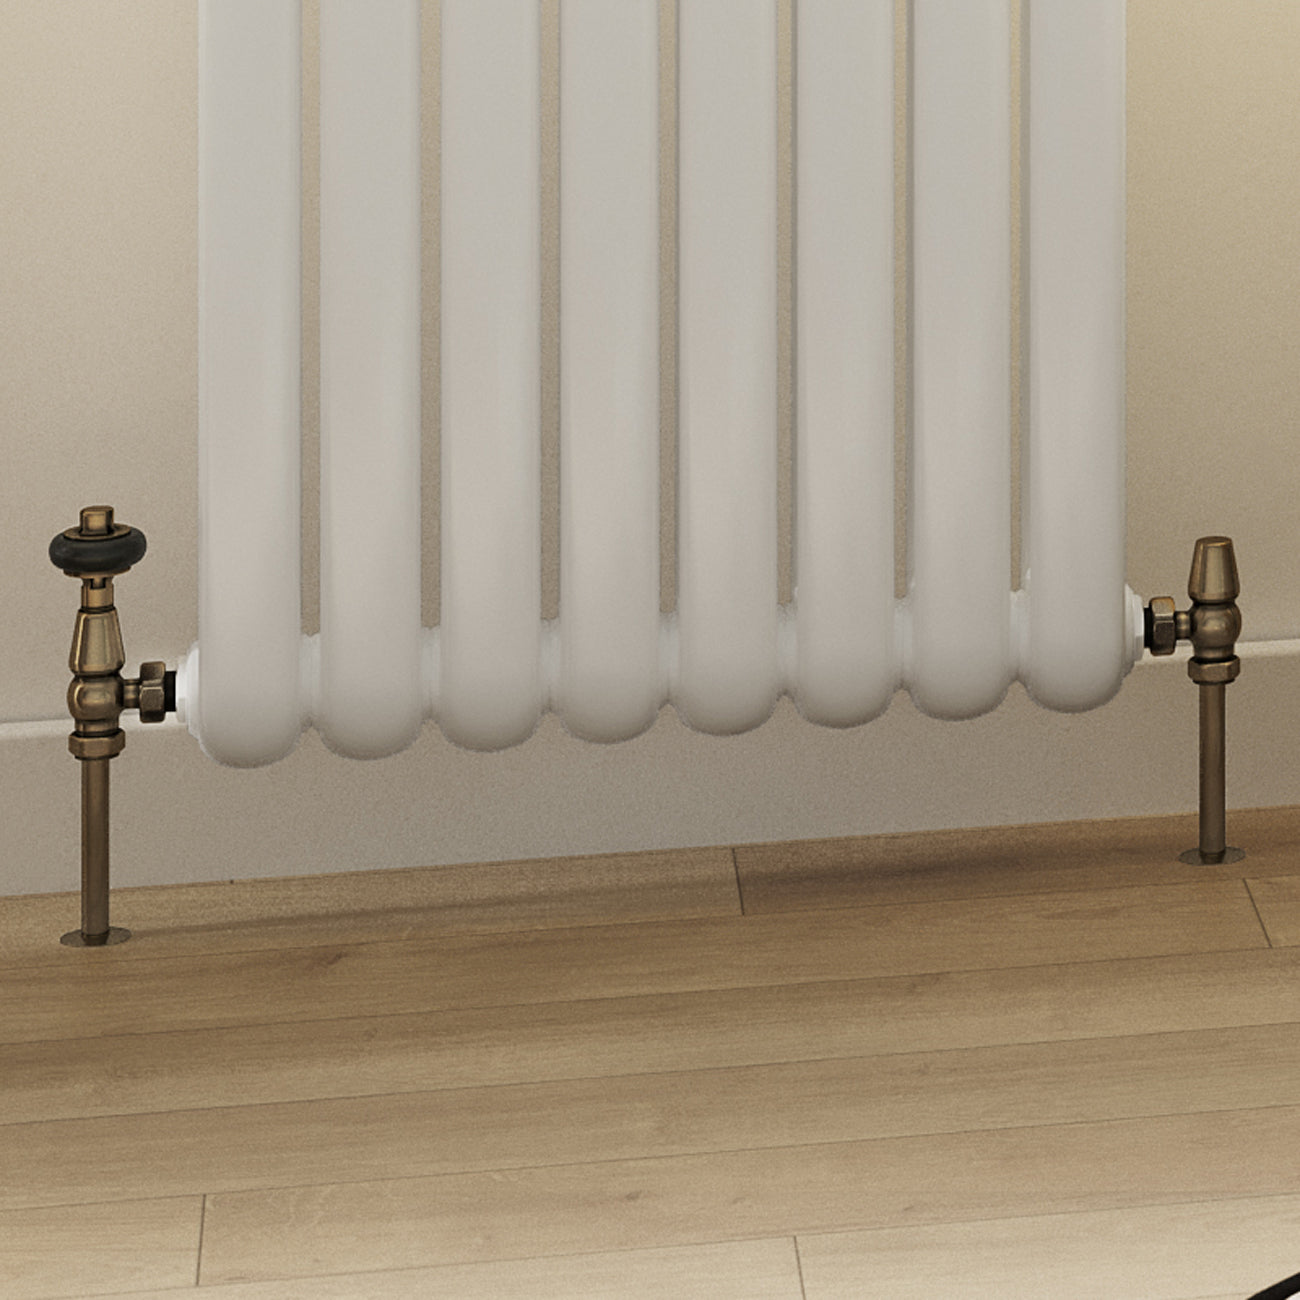 Signature Wooden Head - Antique Brass Thermostatic Radiator Valves Angled